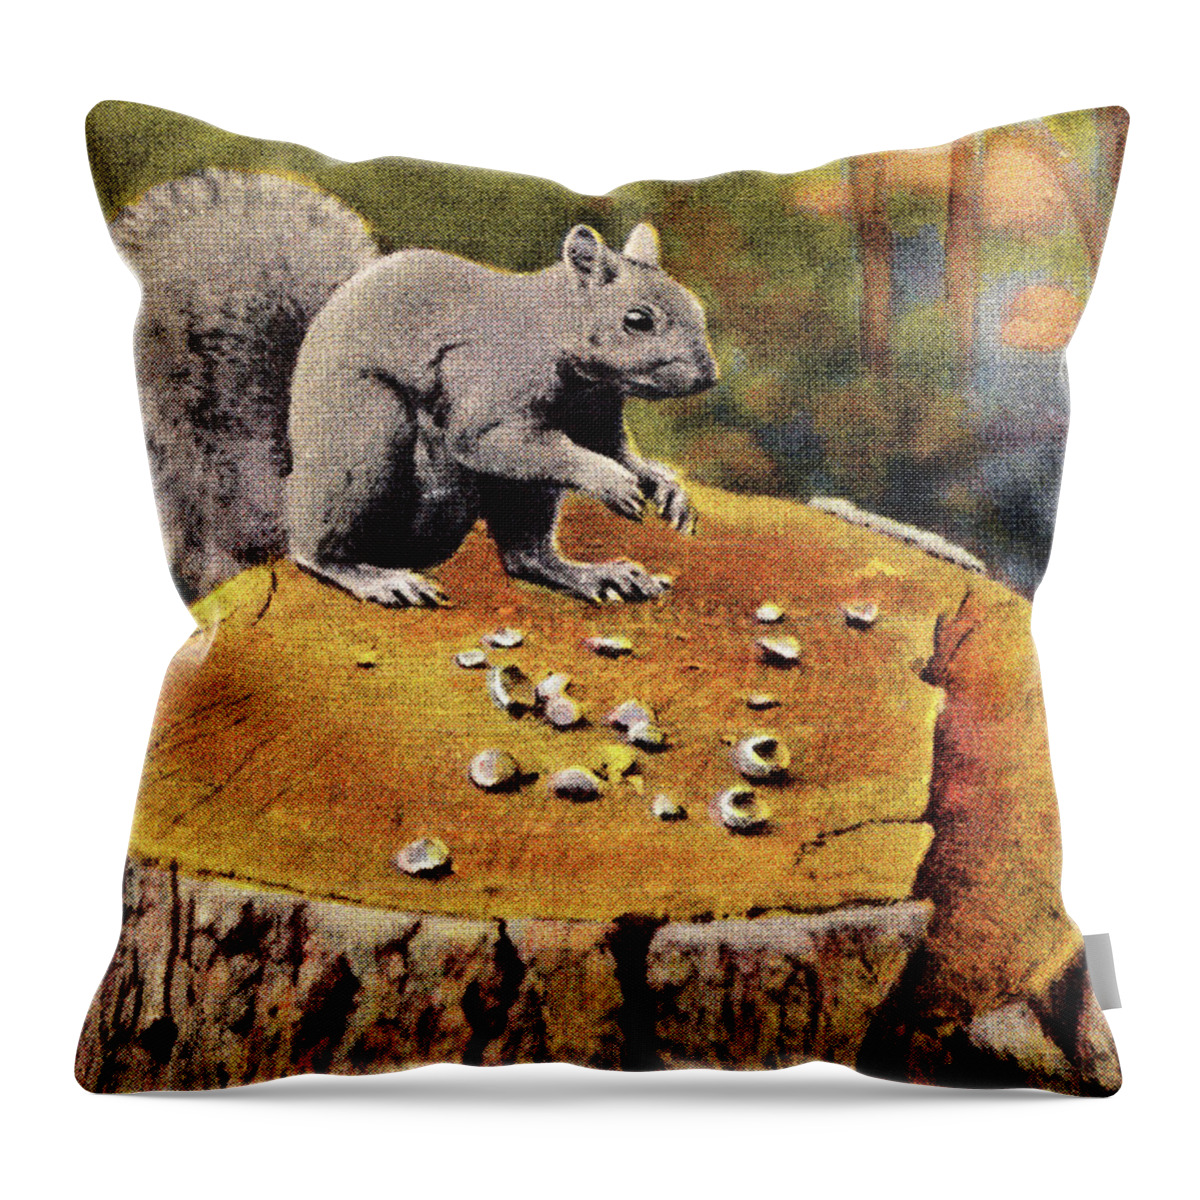 Animal Throw Pillow featuring the drawing Squirrel on Tree Stump by CSA Images